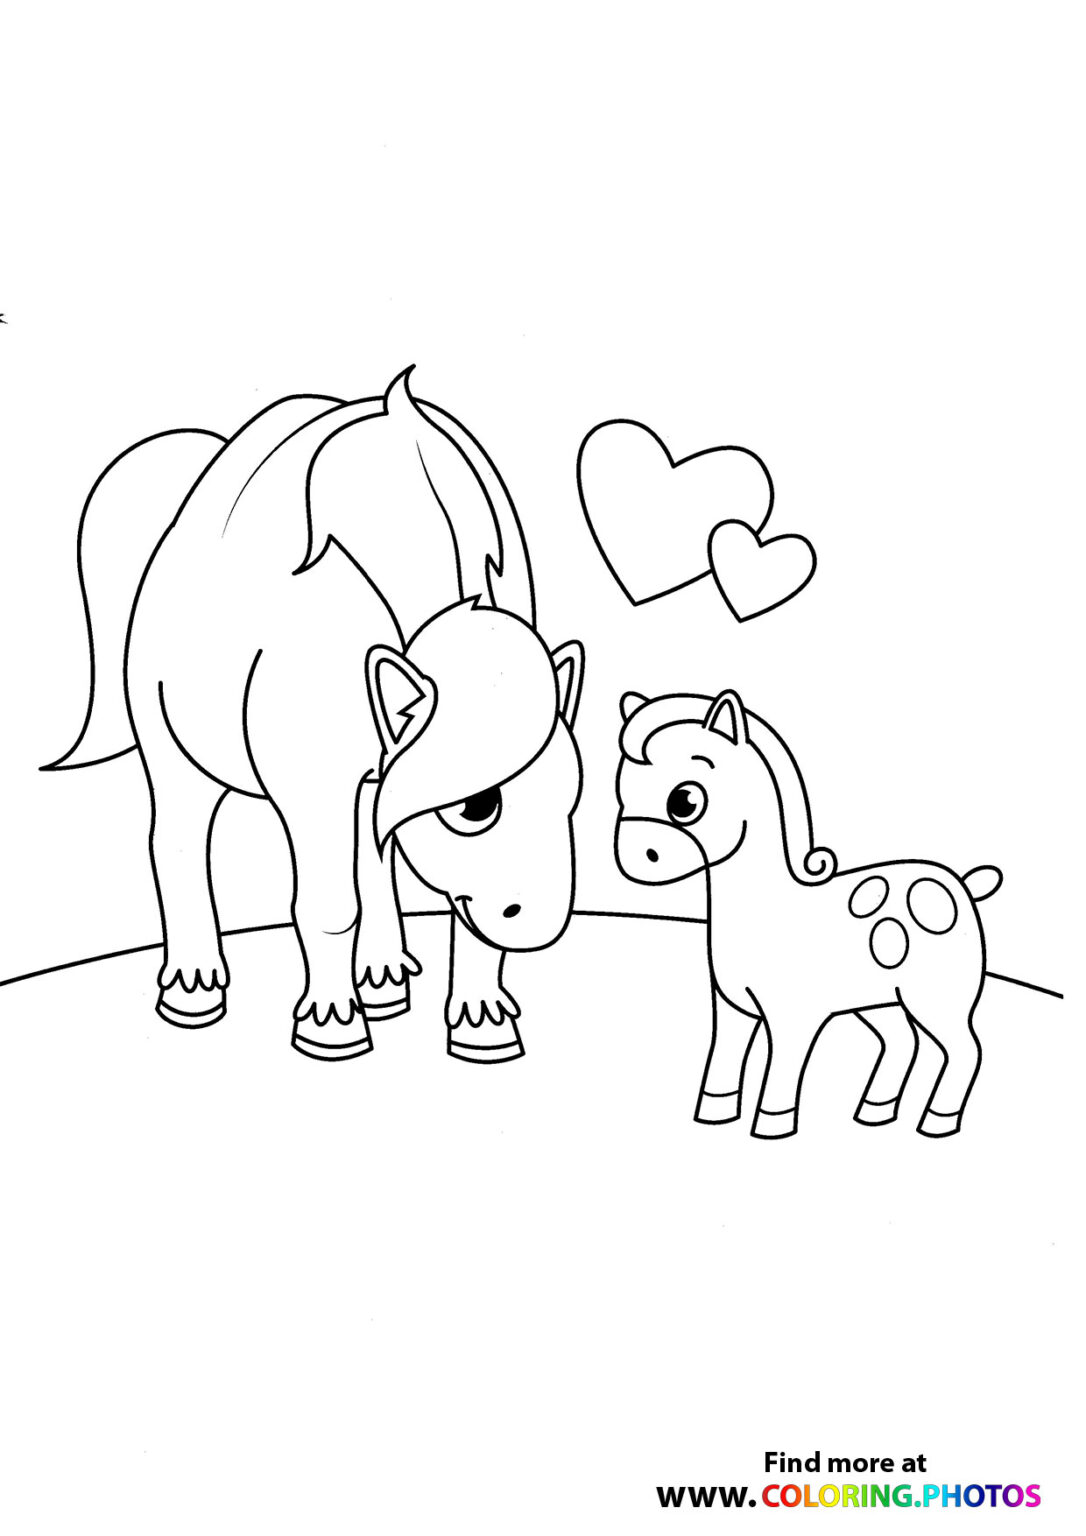 Mama and baby horse - Coloring Pages for kids